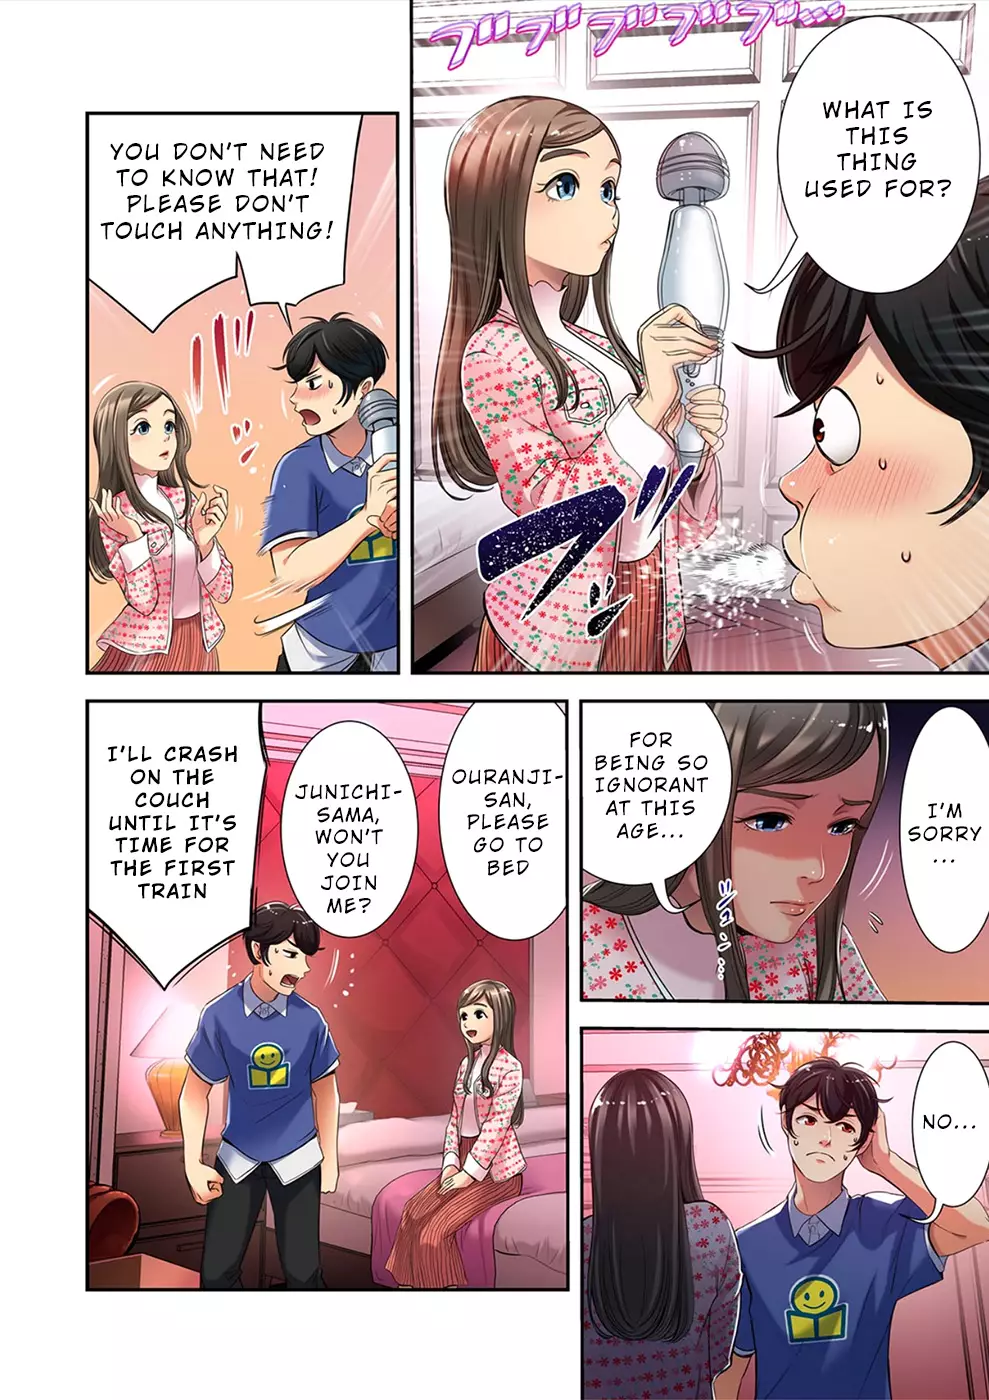 100% Possibility Of Meeting Girls - 14 page 15-7e20003e